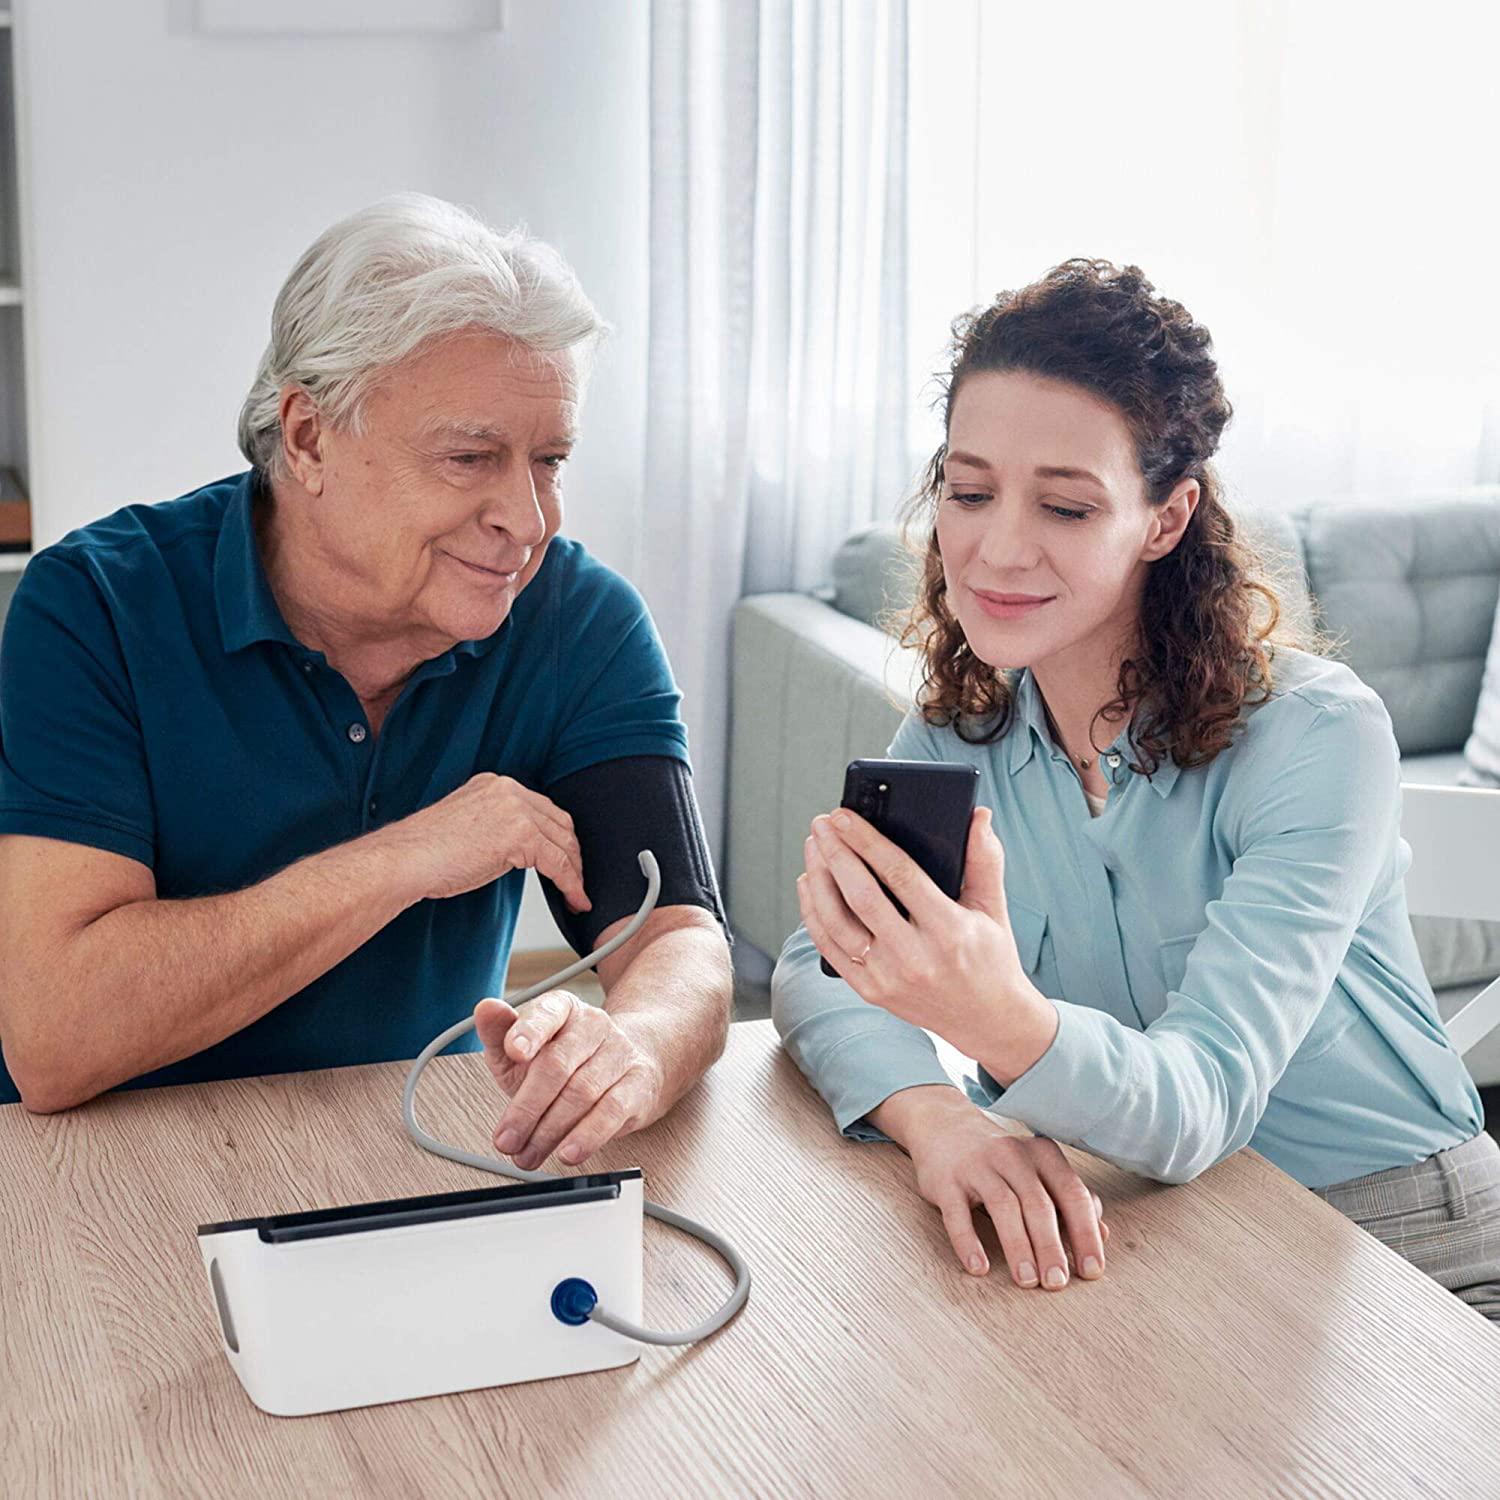 OMRON Complete Smart Home Blood Pressure Monitor and ECG for Hypertension Monitoring and AFib screening at Home - Healthxpress.ie